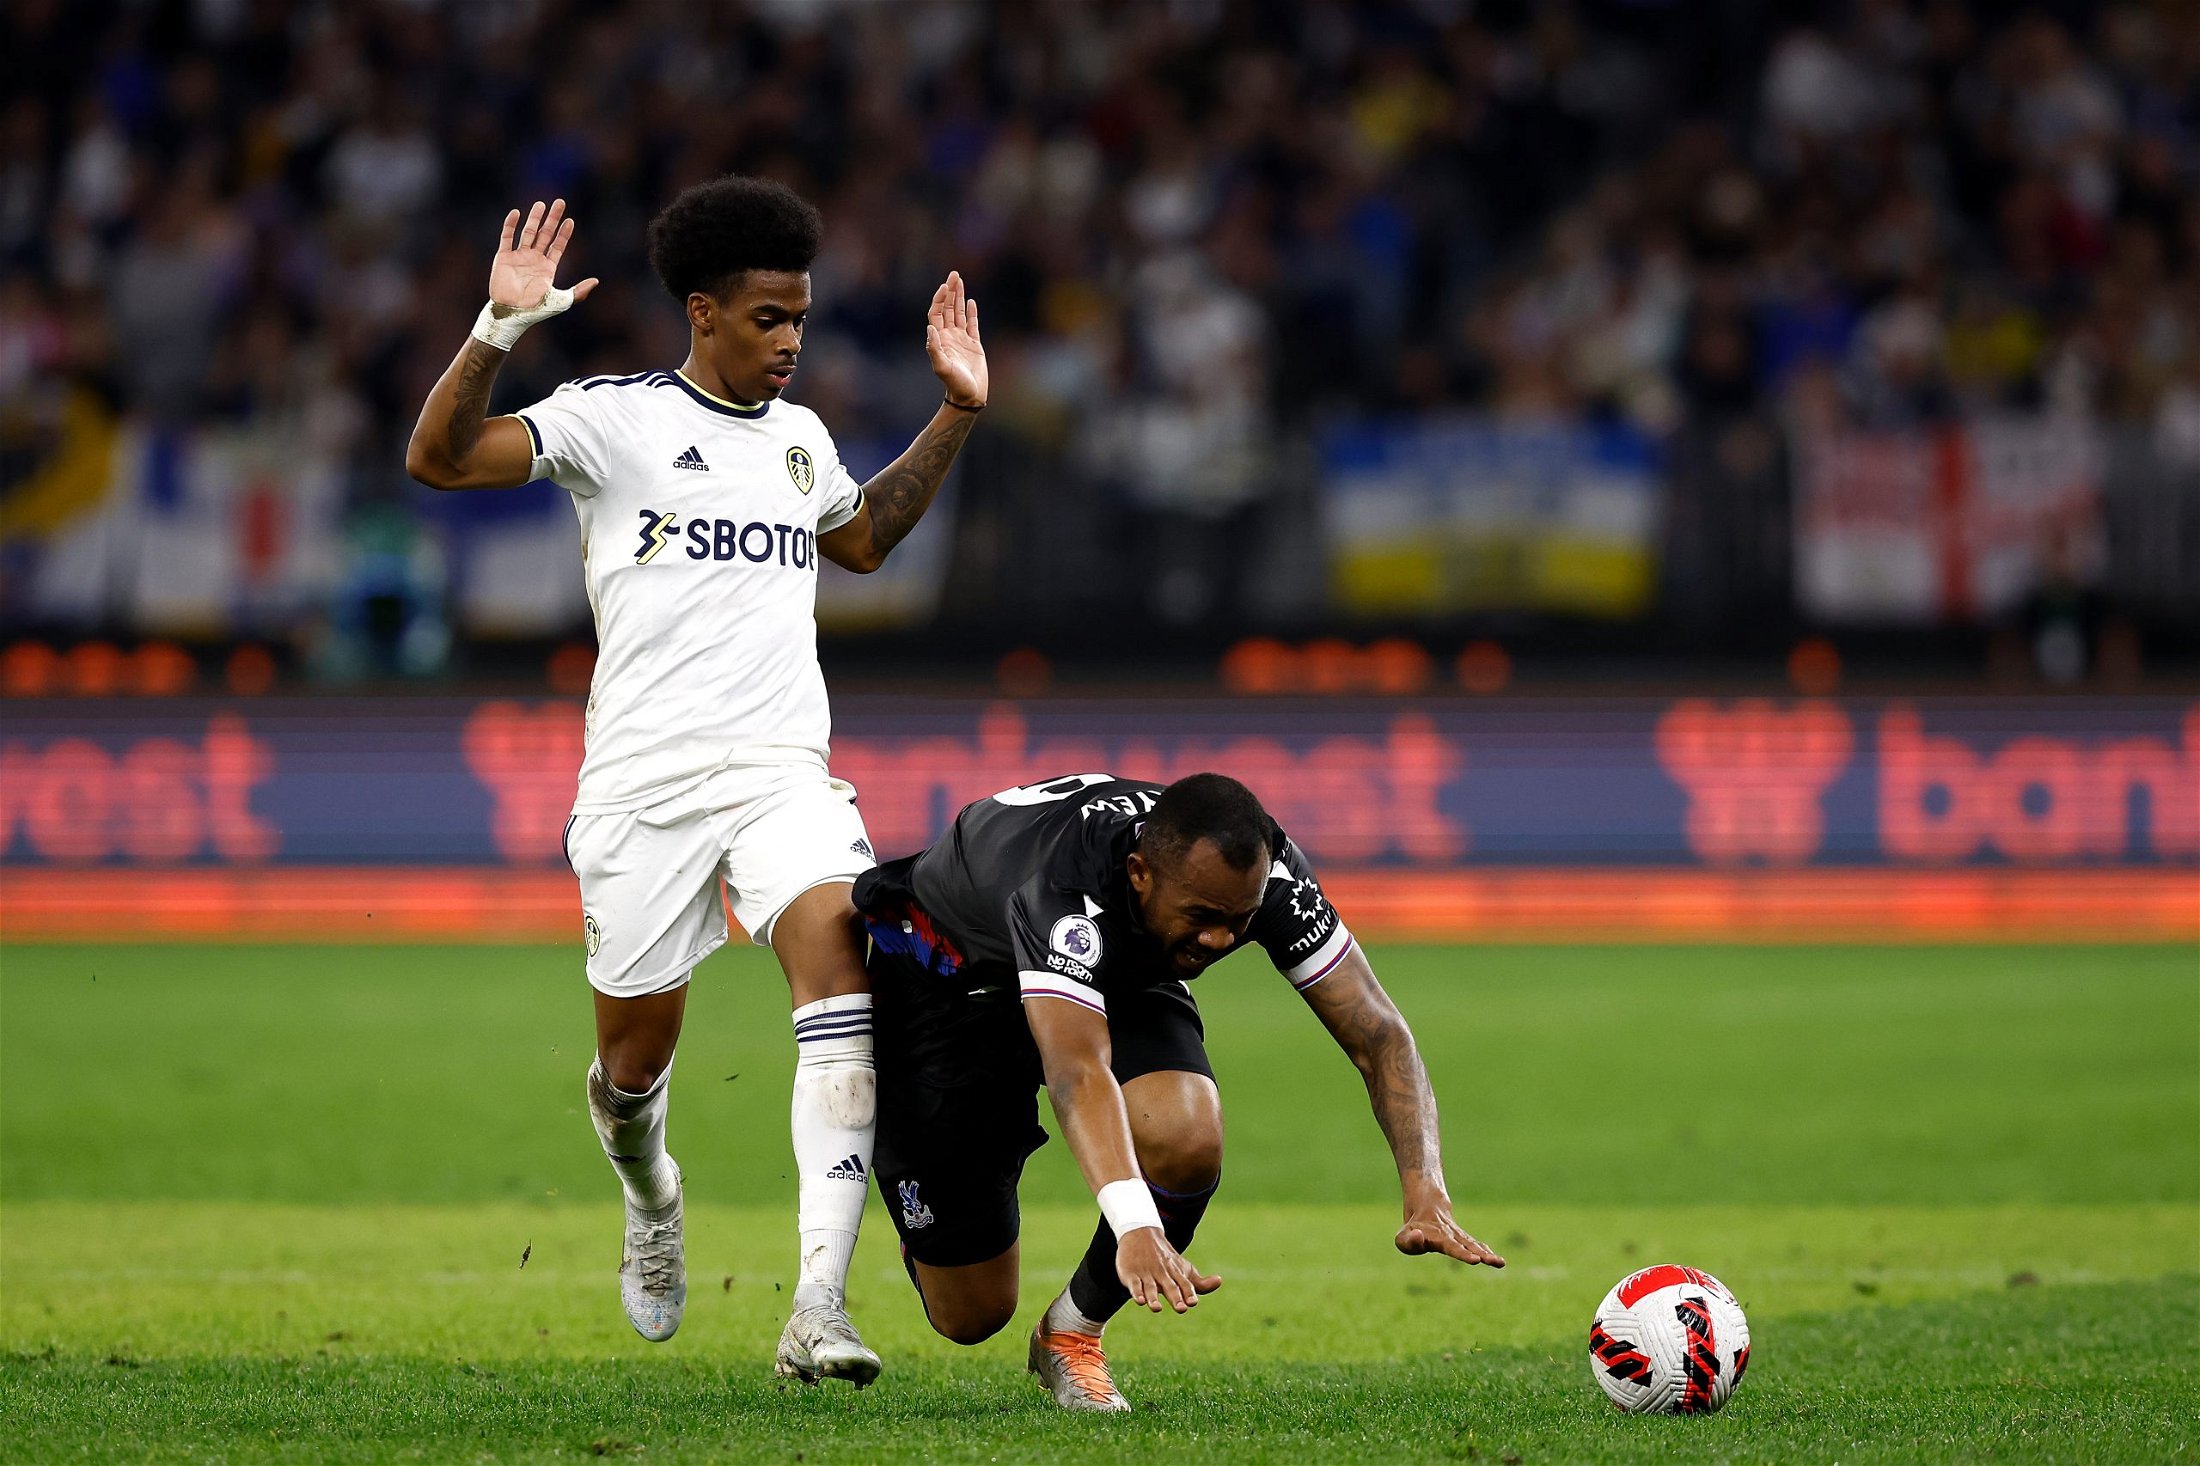 “Now is the time” – Victor Orta challenges Leeds United player after club agreement